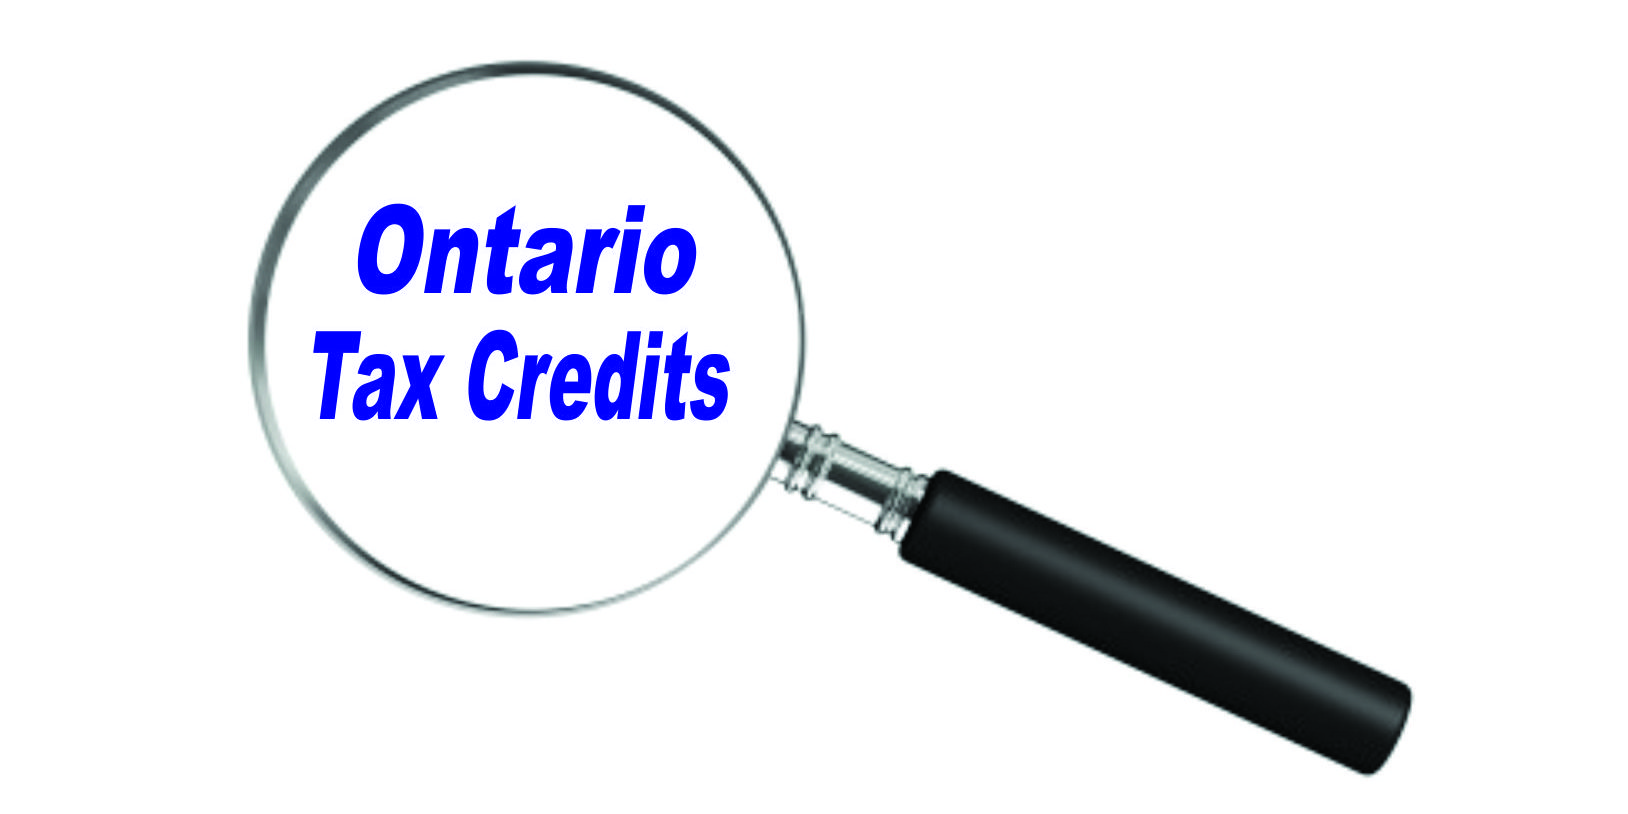 do-ontario-tax-credit-incentives-really-help-toronto-businesses